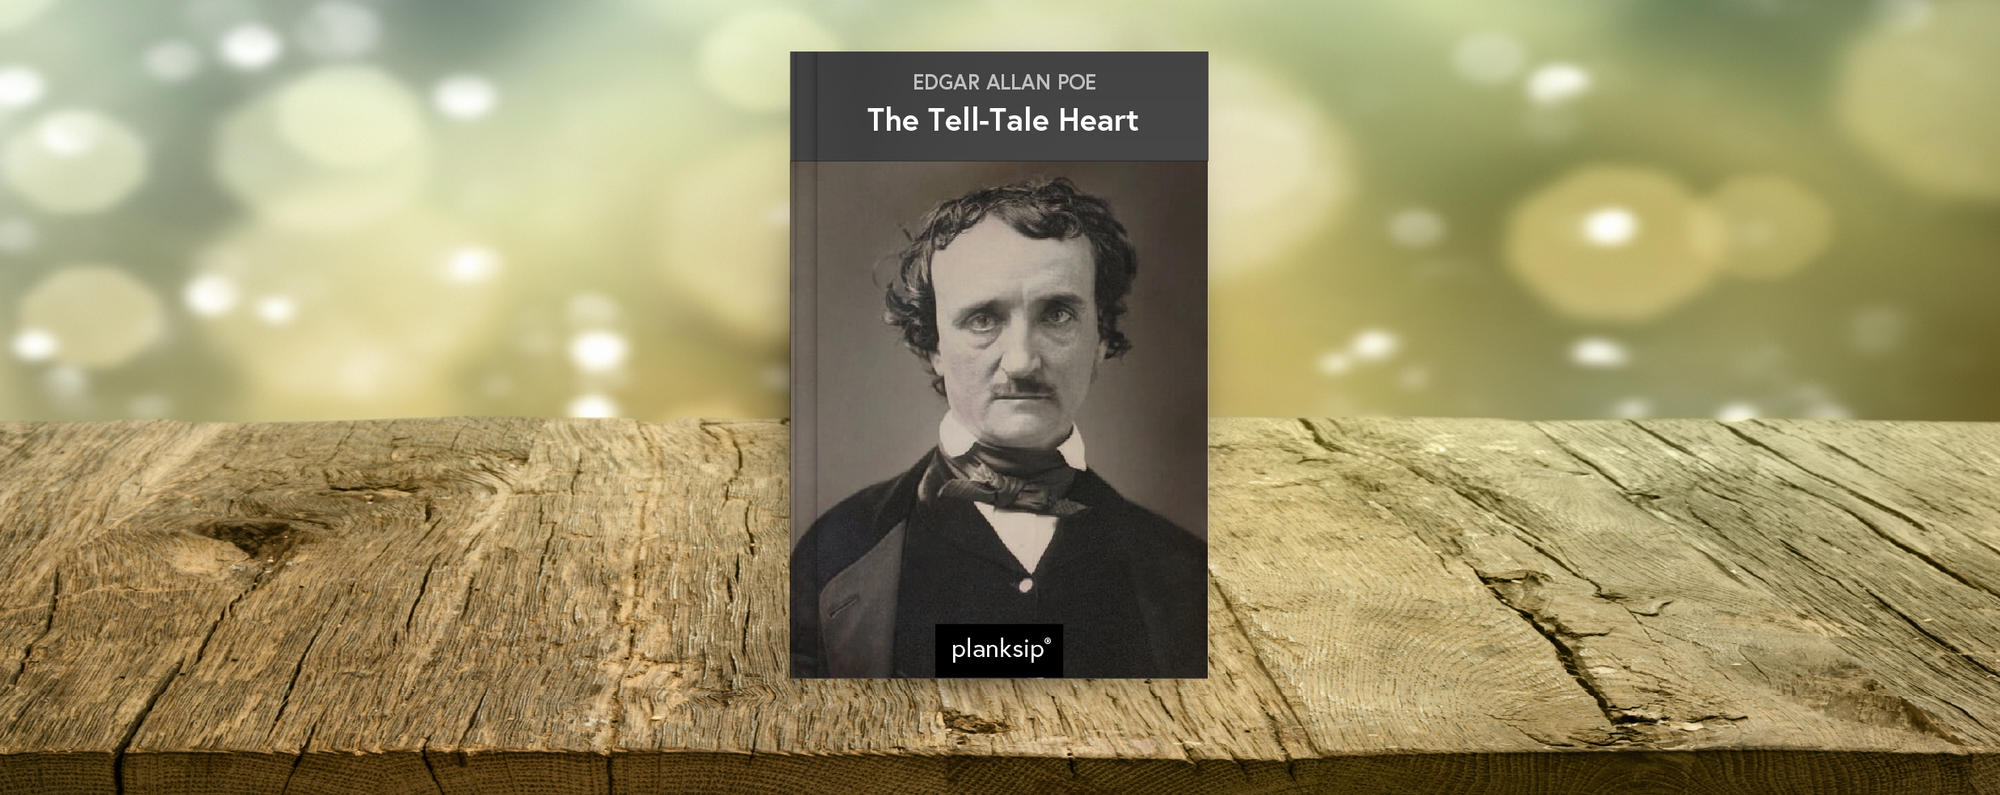 when was the tell tale heart published